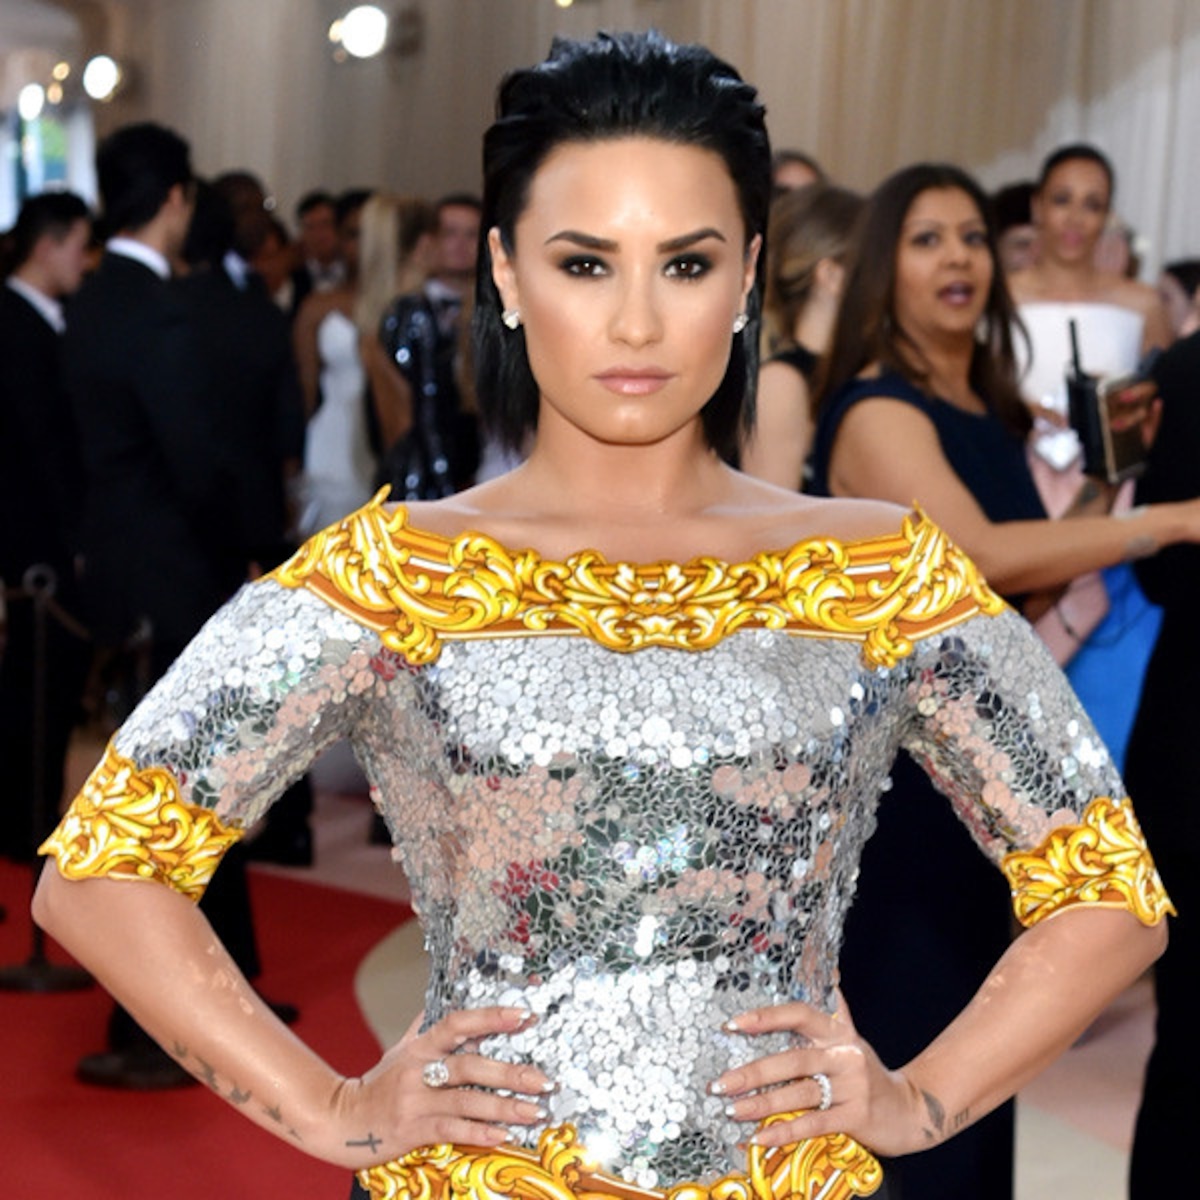 Demi Lovato Has Never Looked More Confident At Met Gala 2016 - E! Online